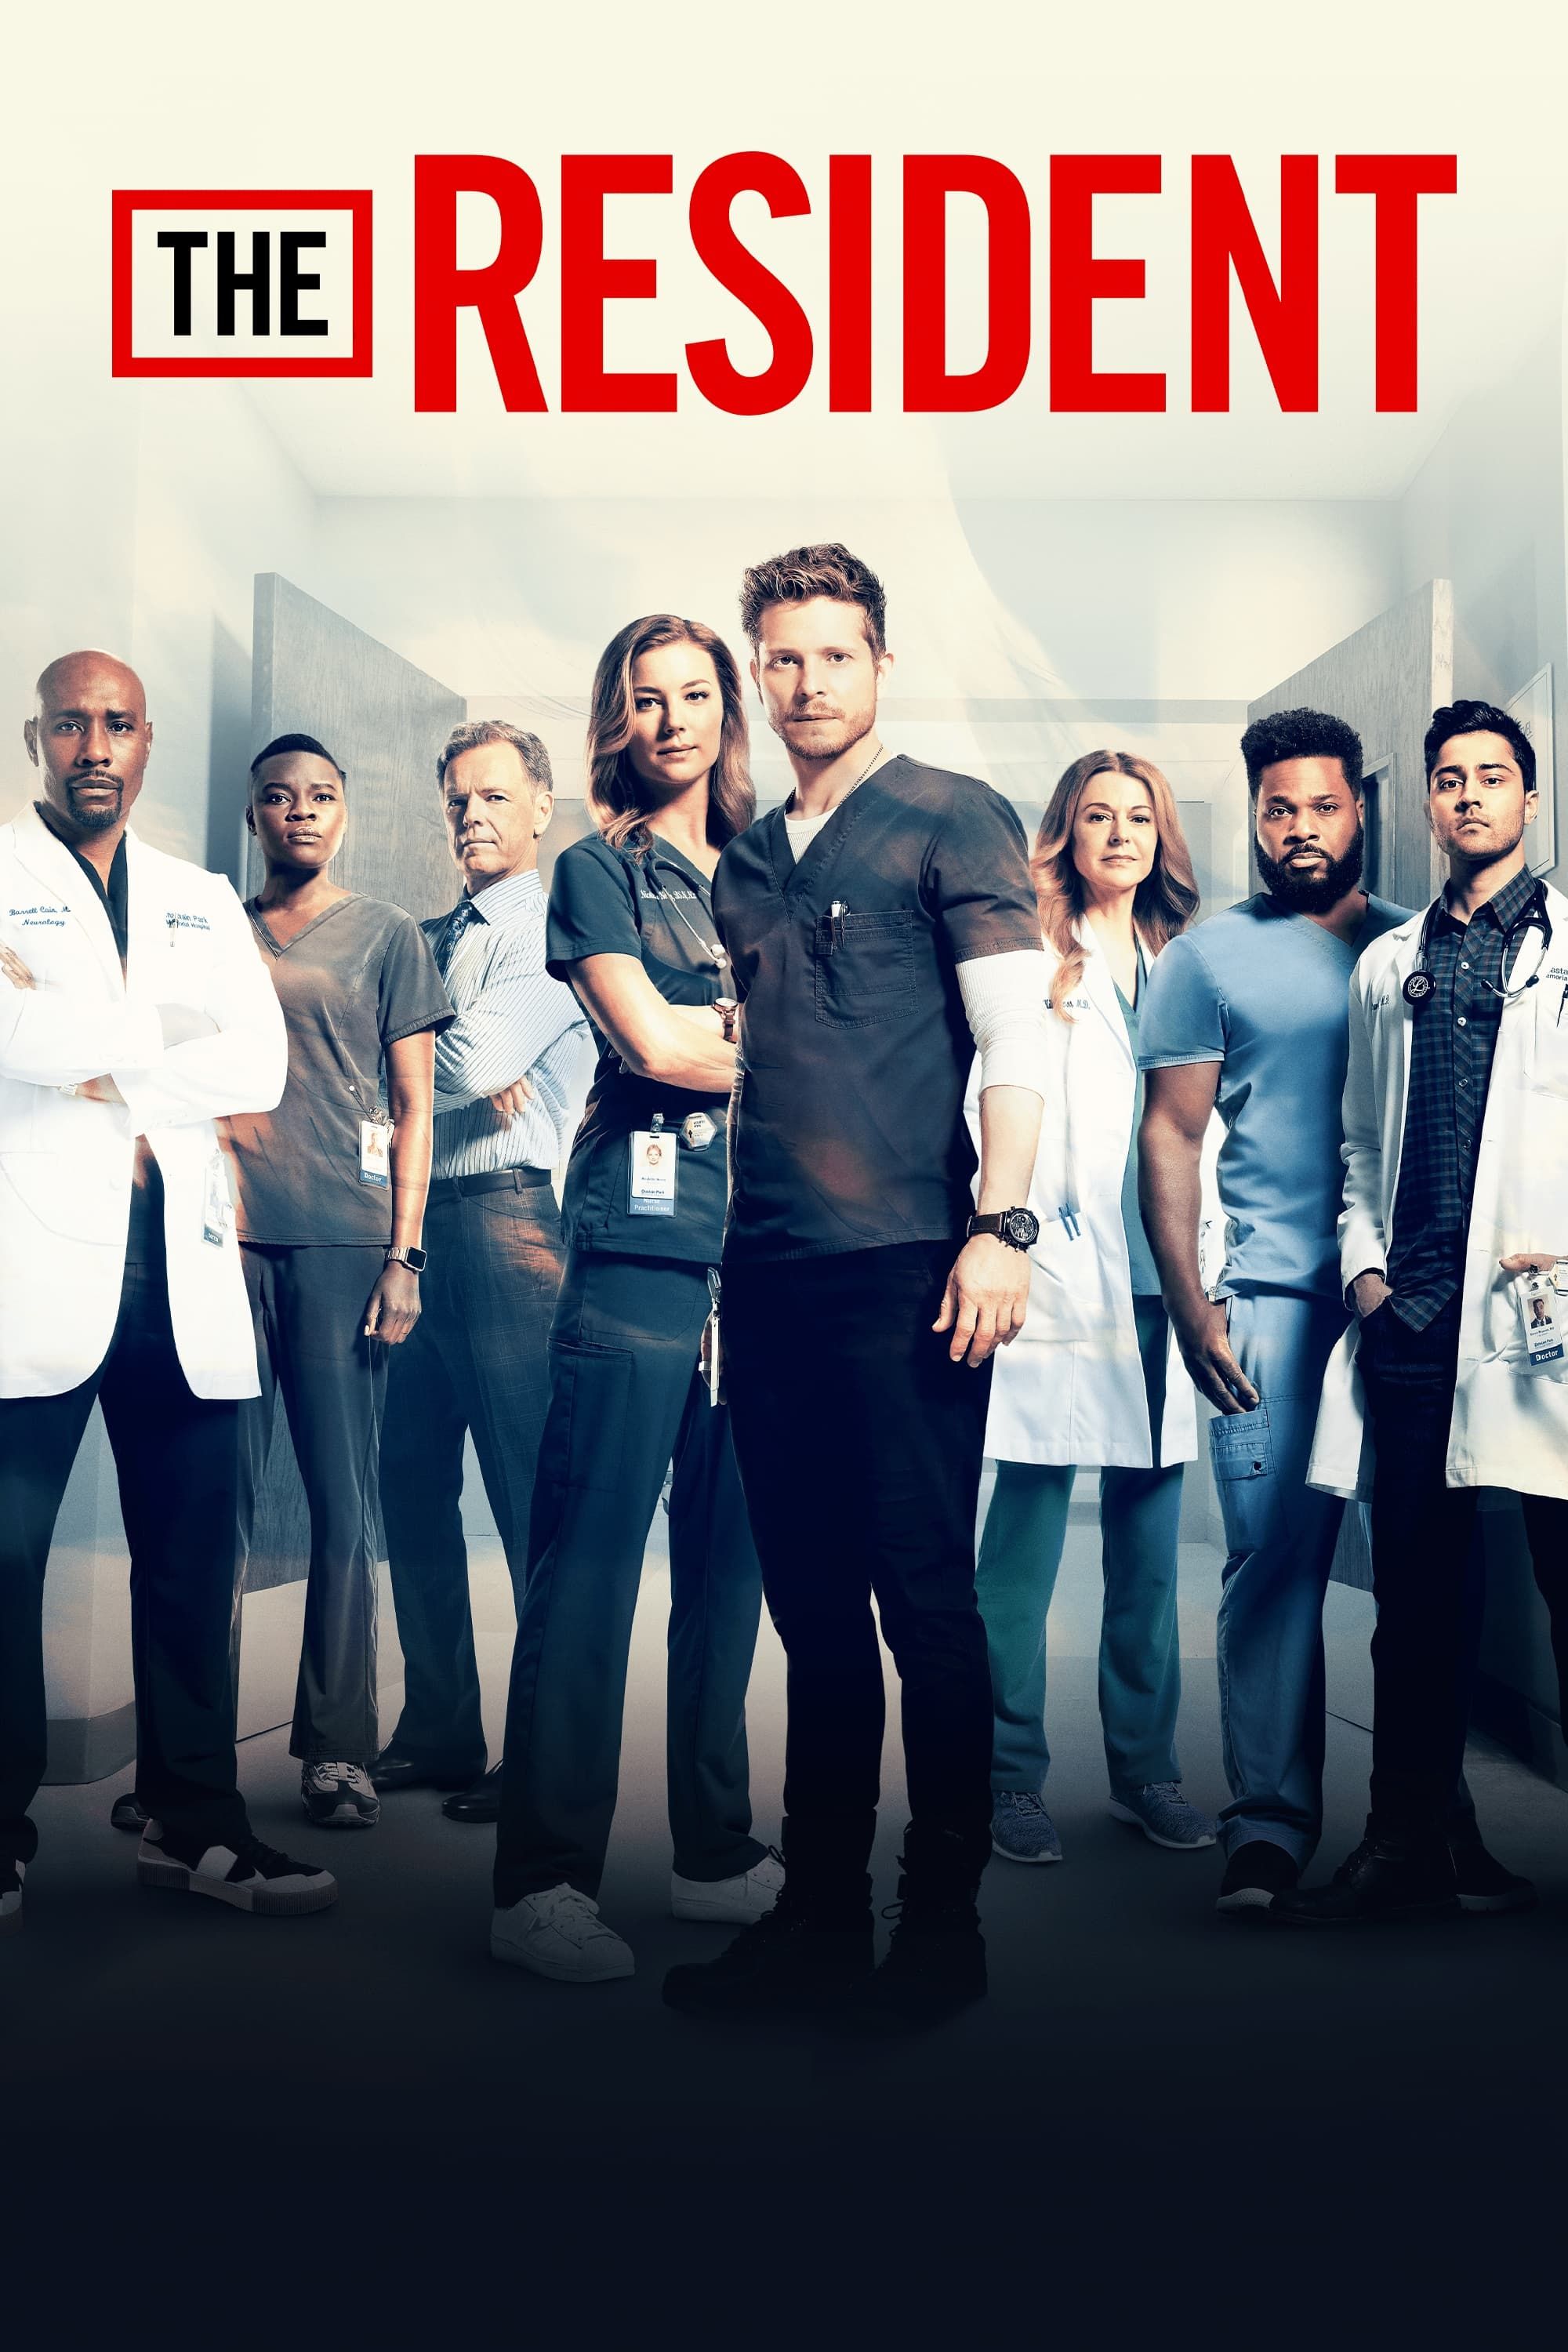 A group of doctors together, including Matt Czuchry and Emily VanCamp in The Resident poster